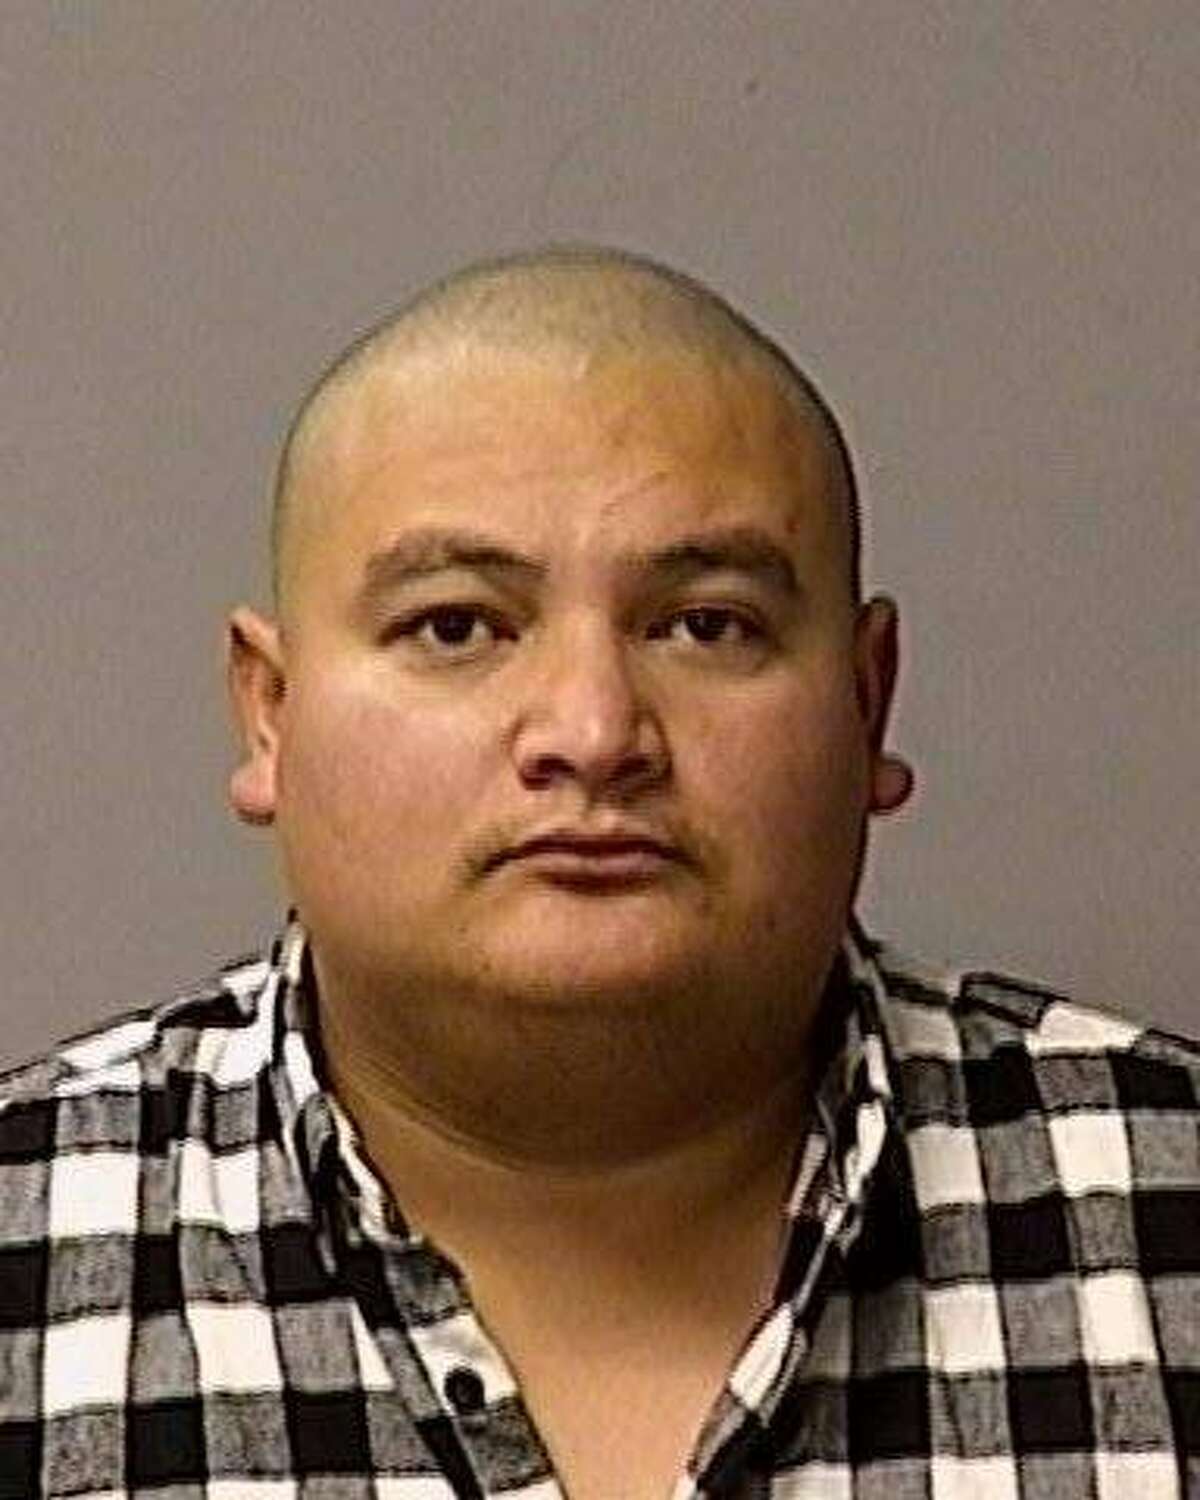 Gustavo Perez Arriaga, 32, pictured in a booking photo days after he was suspected of fatally shooting Newman police Cpl. Ronil Singh during a traffic stop on Christmas morning. He was arrested on Friday in the 8200 block of Brooks Lane just south of Bakersfield in the town of Lamont (Kern County).